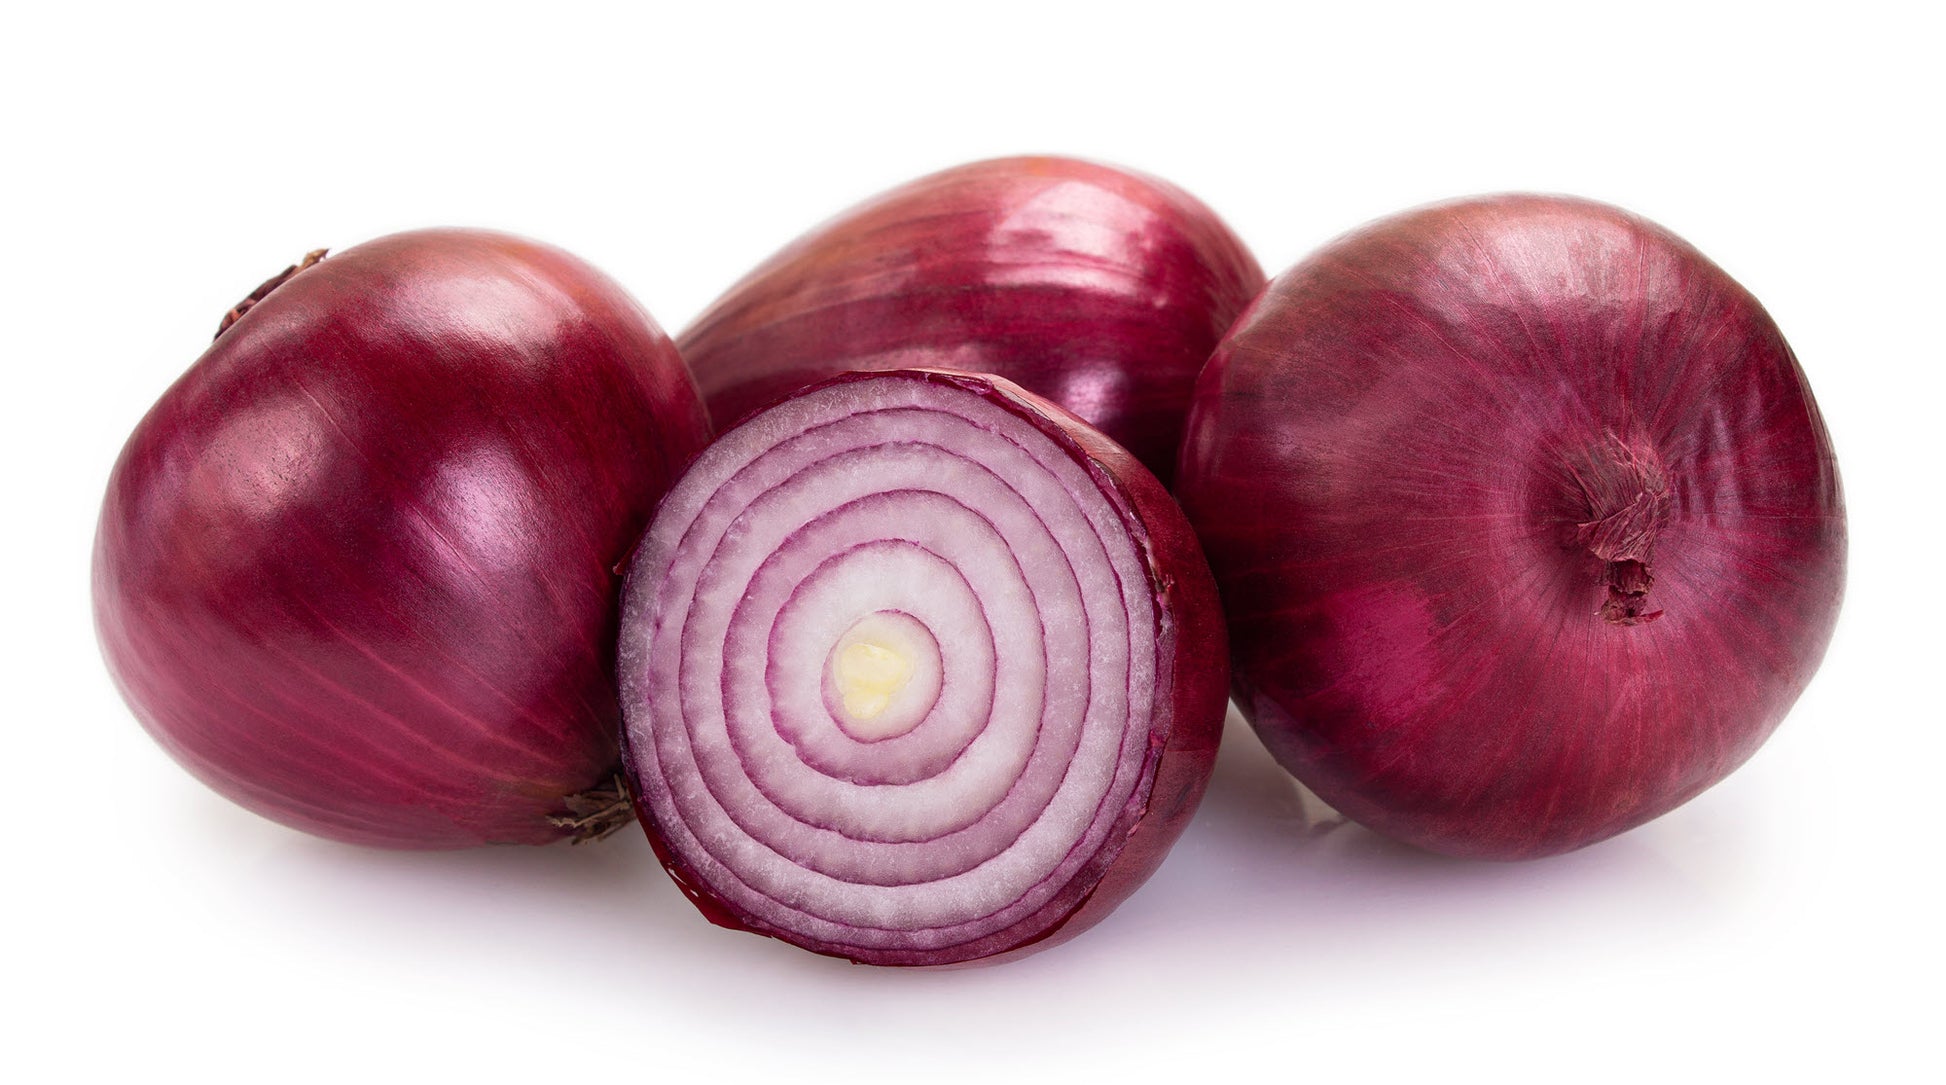 On display are 4 red onions, of the variety Short Red Creole. The red onions display their characteristic dark red shades. The onions are resting on a pure white surface. The red onion closest to us is cut in half, displaying the concentric rings of alternating red and white. 